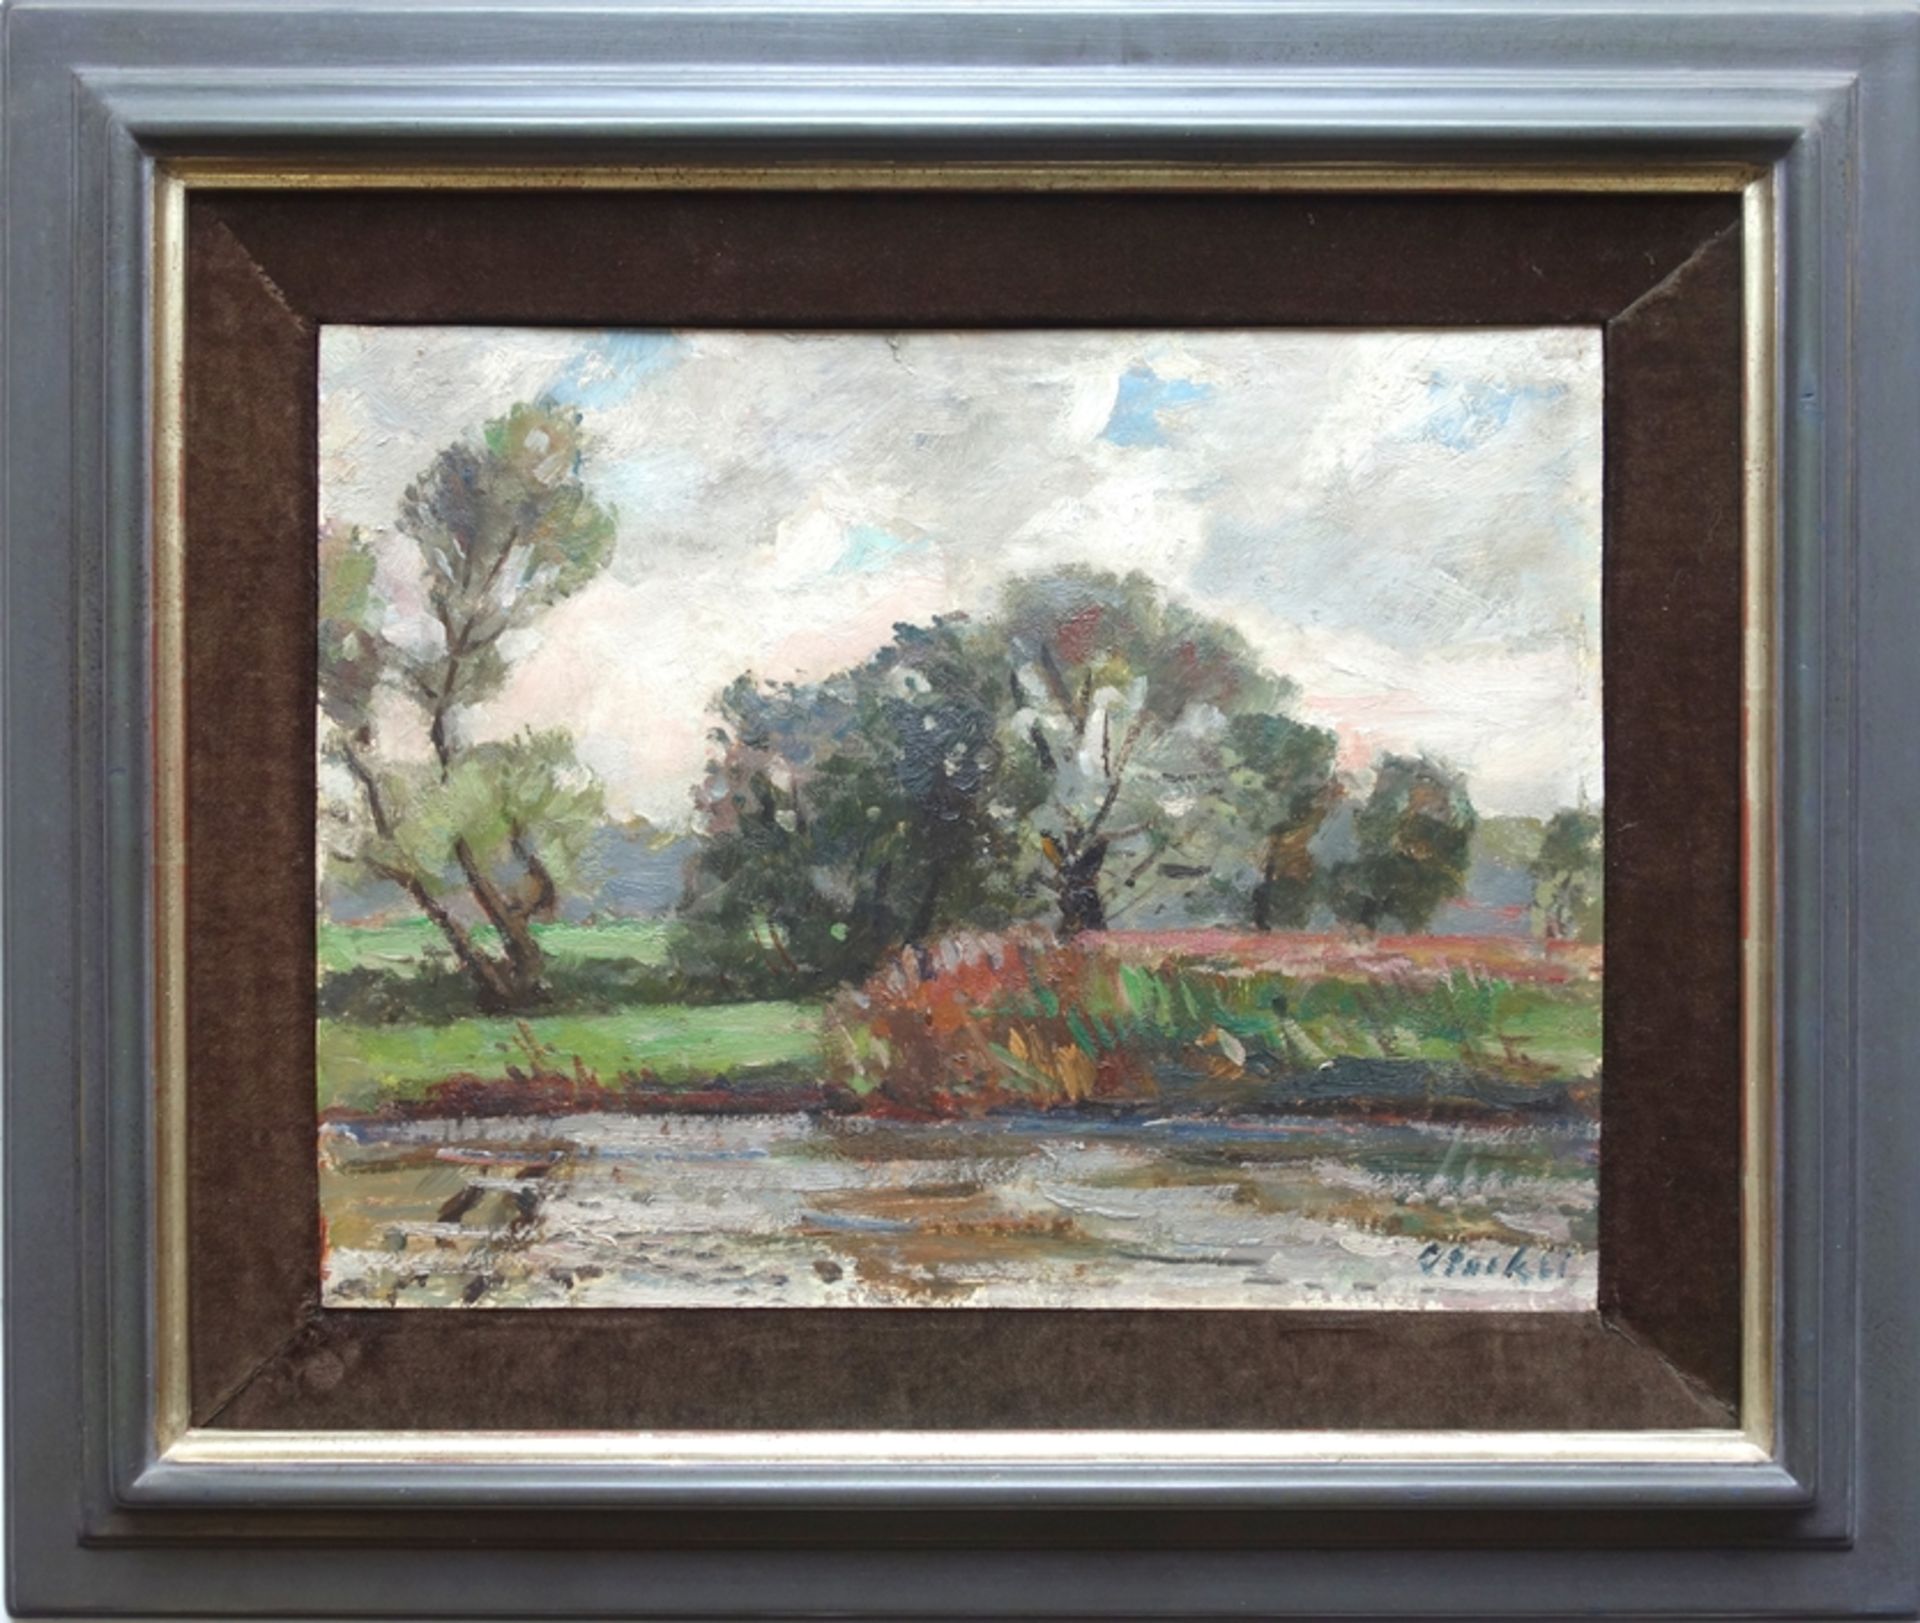 illegibly signed, "Landscape with river course", 1st half 20th century, oil/wood